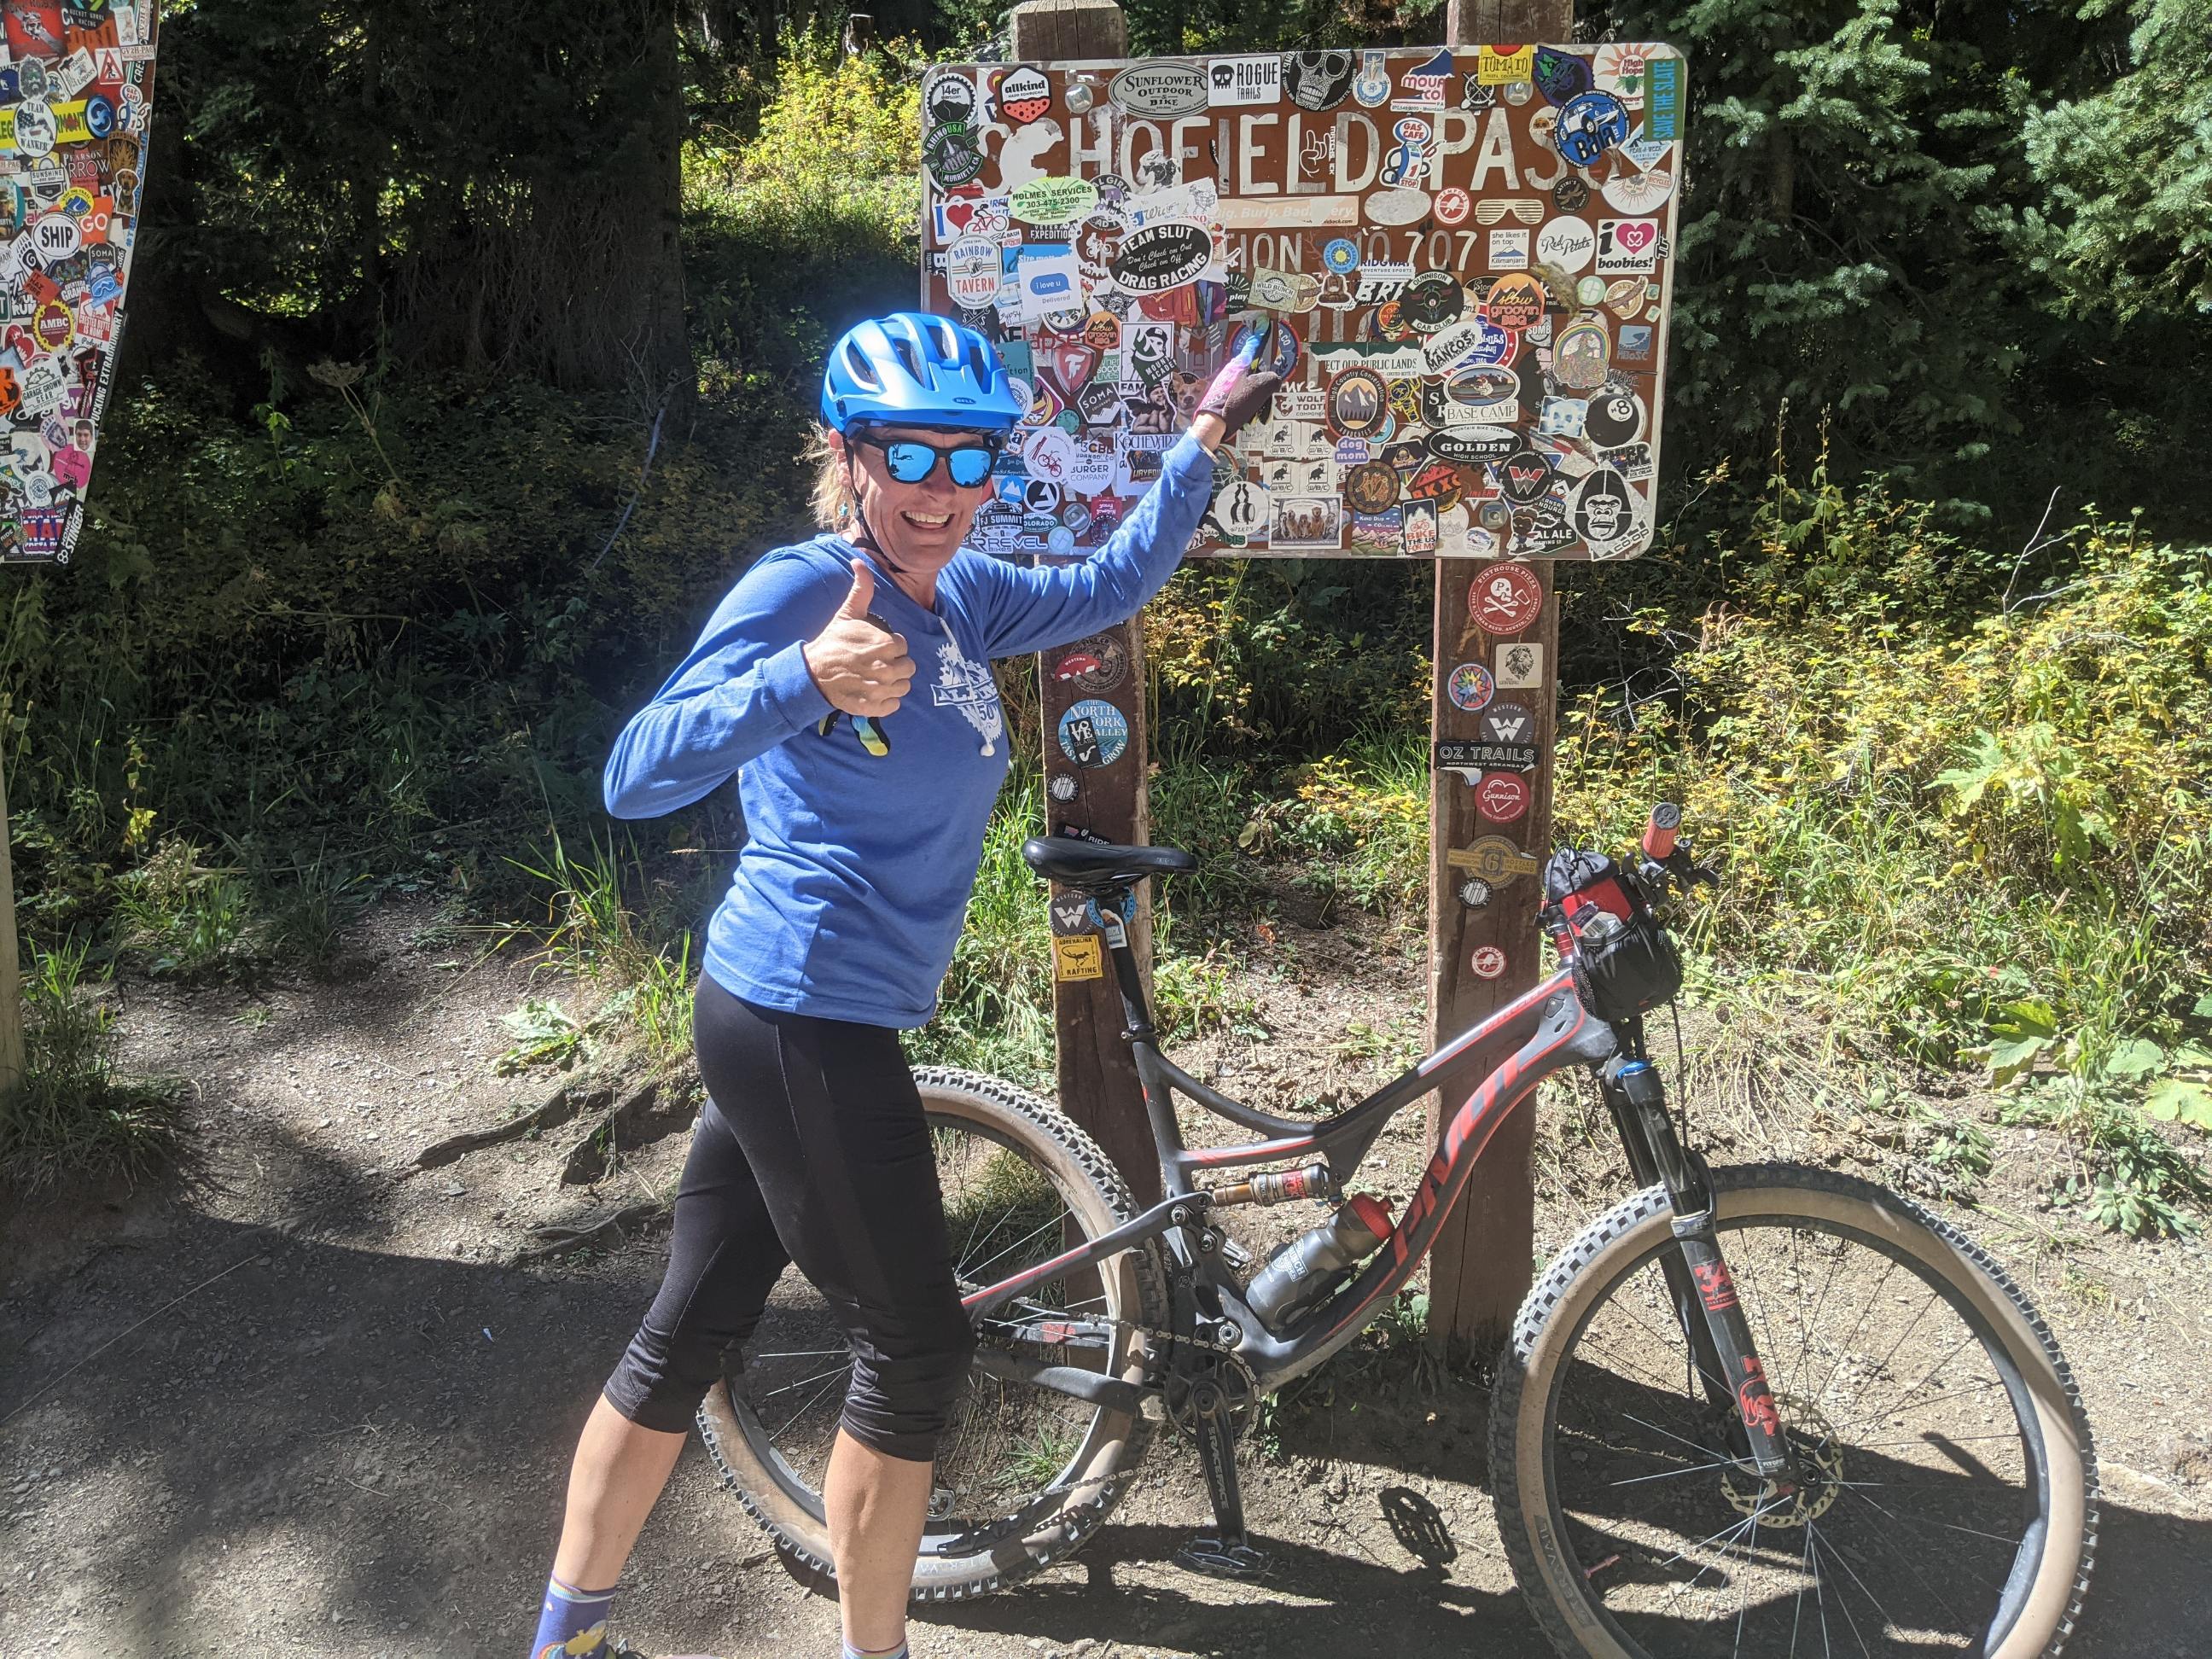 Laurel Darren is thumbs up excited while posing in front of a sign on Trail 401 in Crested Butte.